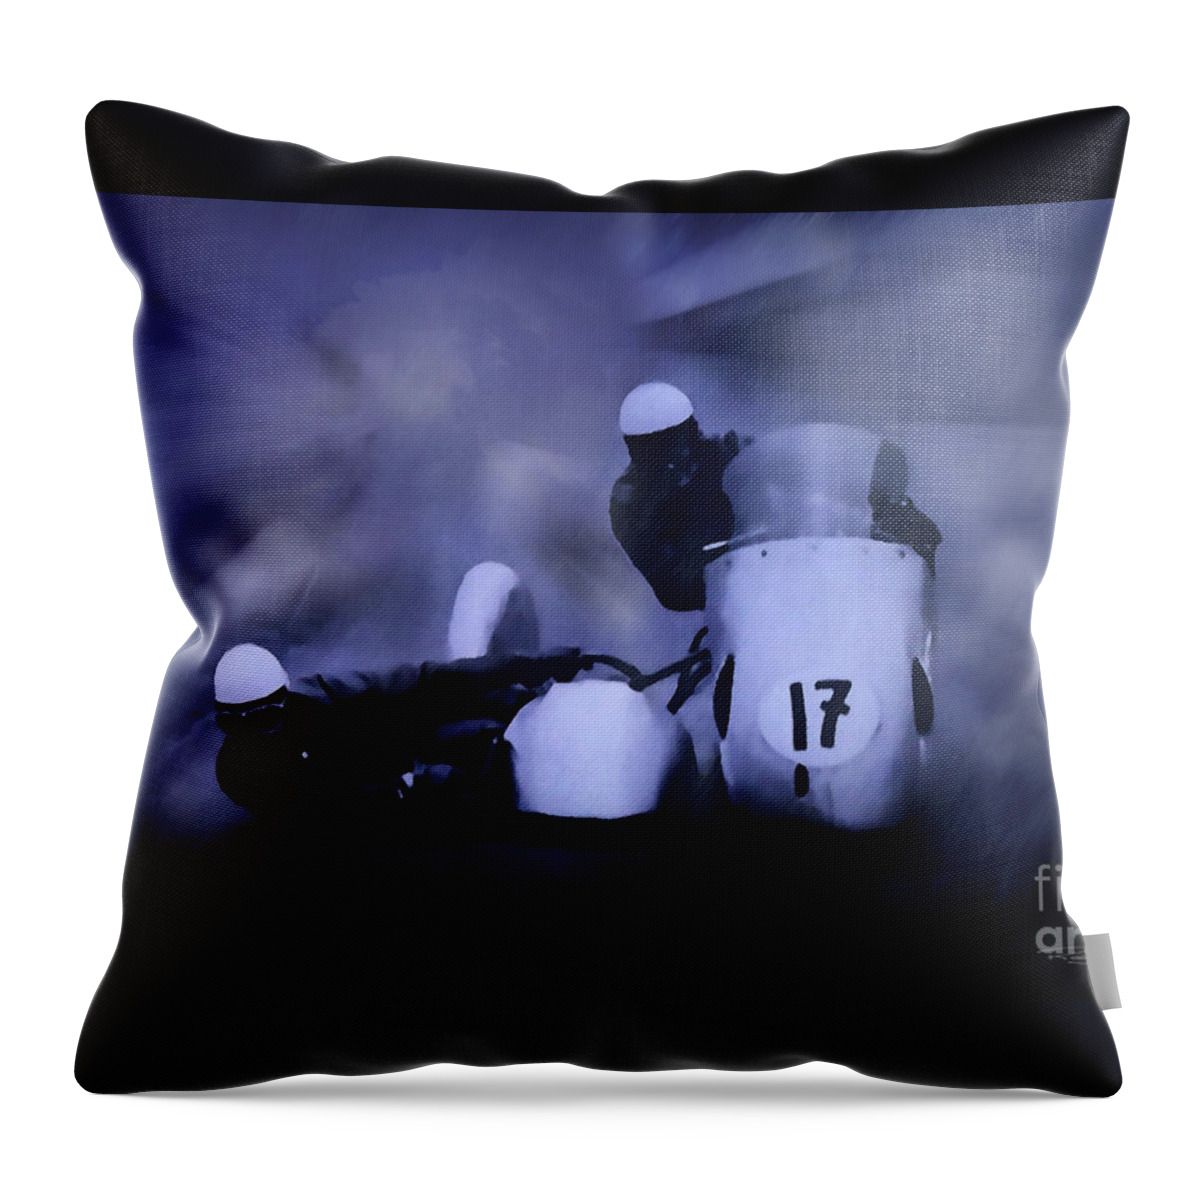 Motorcycles Throw Pillow featuring the digital art The Brave by Roger Lighterness